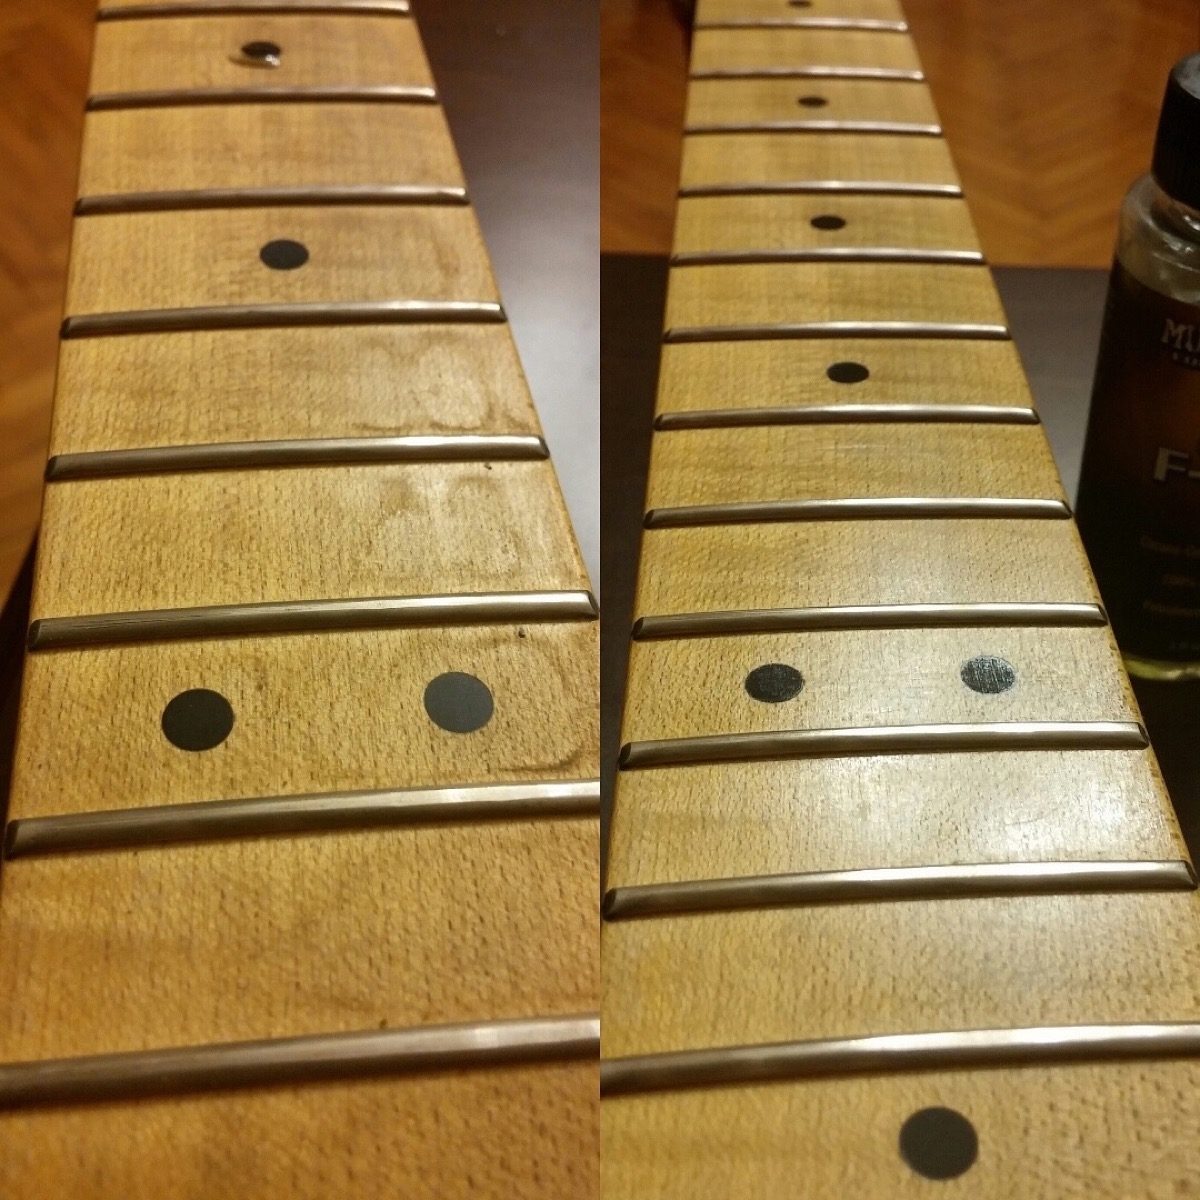 How to Clean and Condition a Rosewood Fretboard on a Guitar, Bass